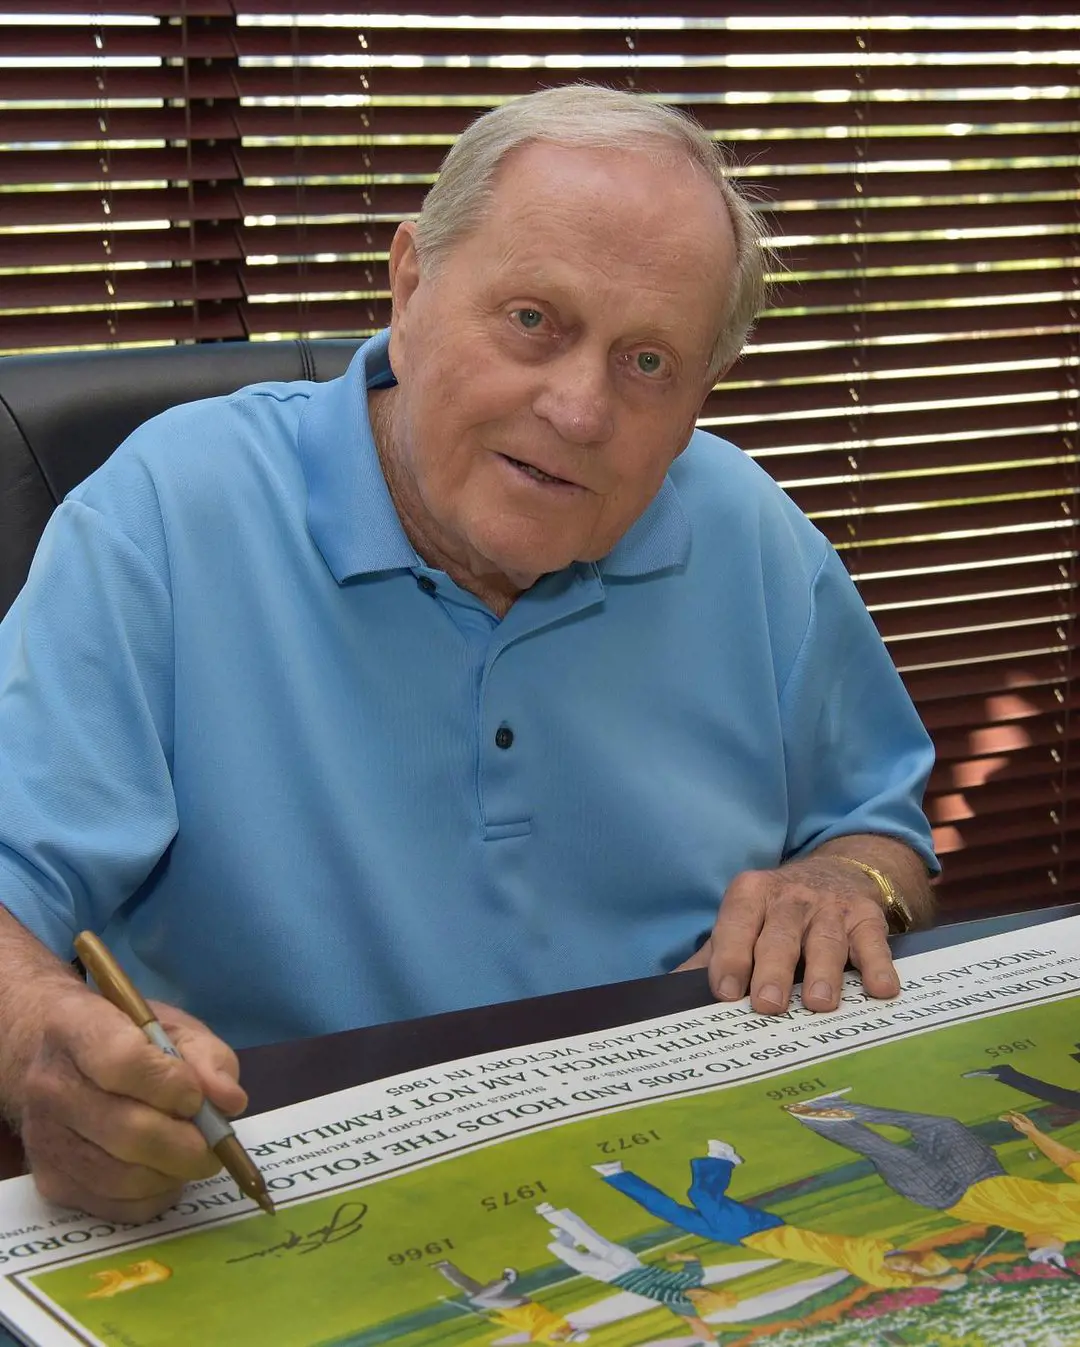 Nicklaus is a grandad, he is sharing special memories from the Masters translated in a painting by Lee Wybranski